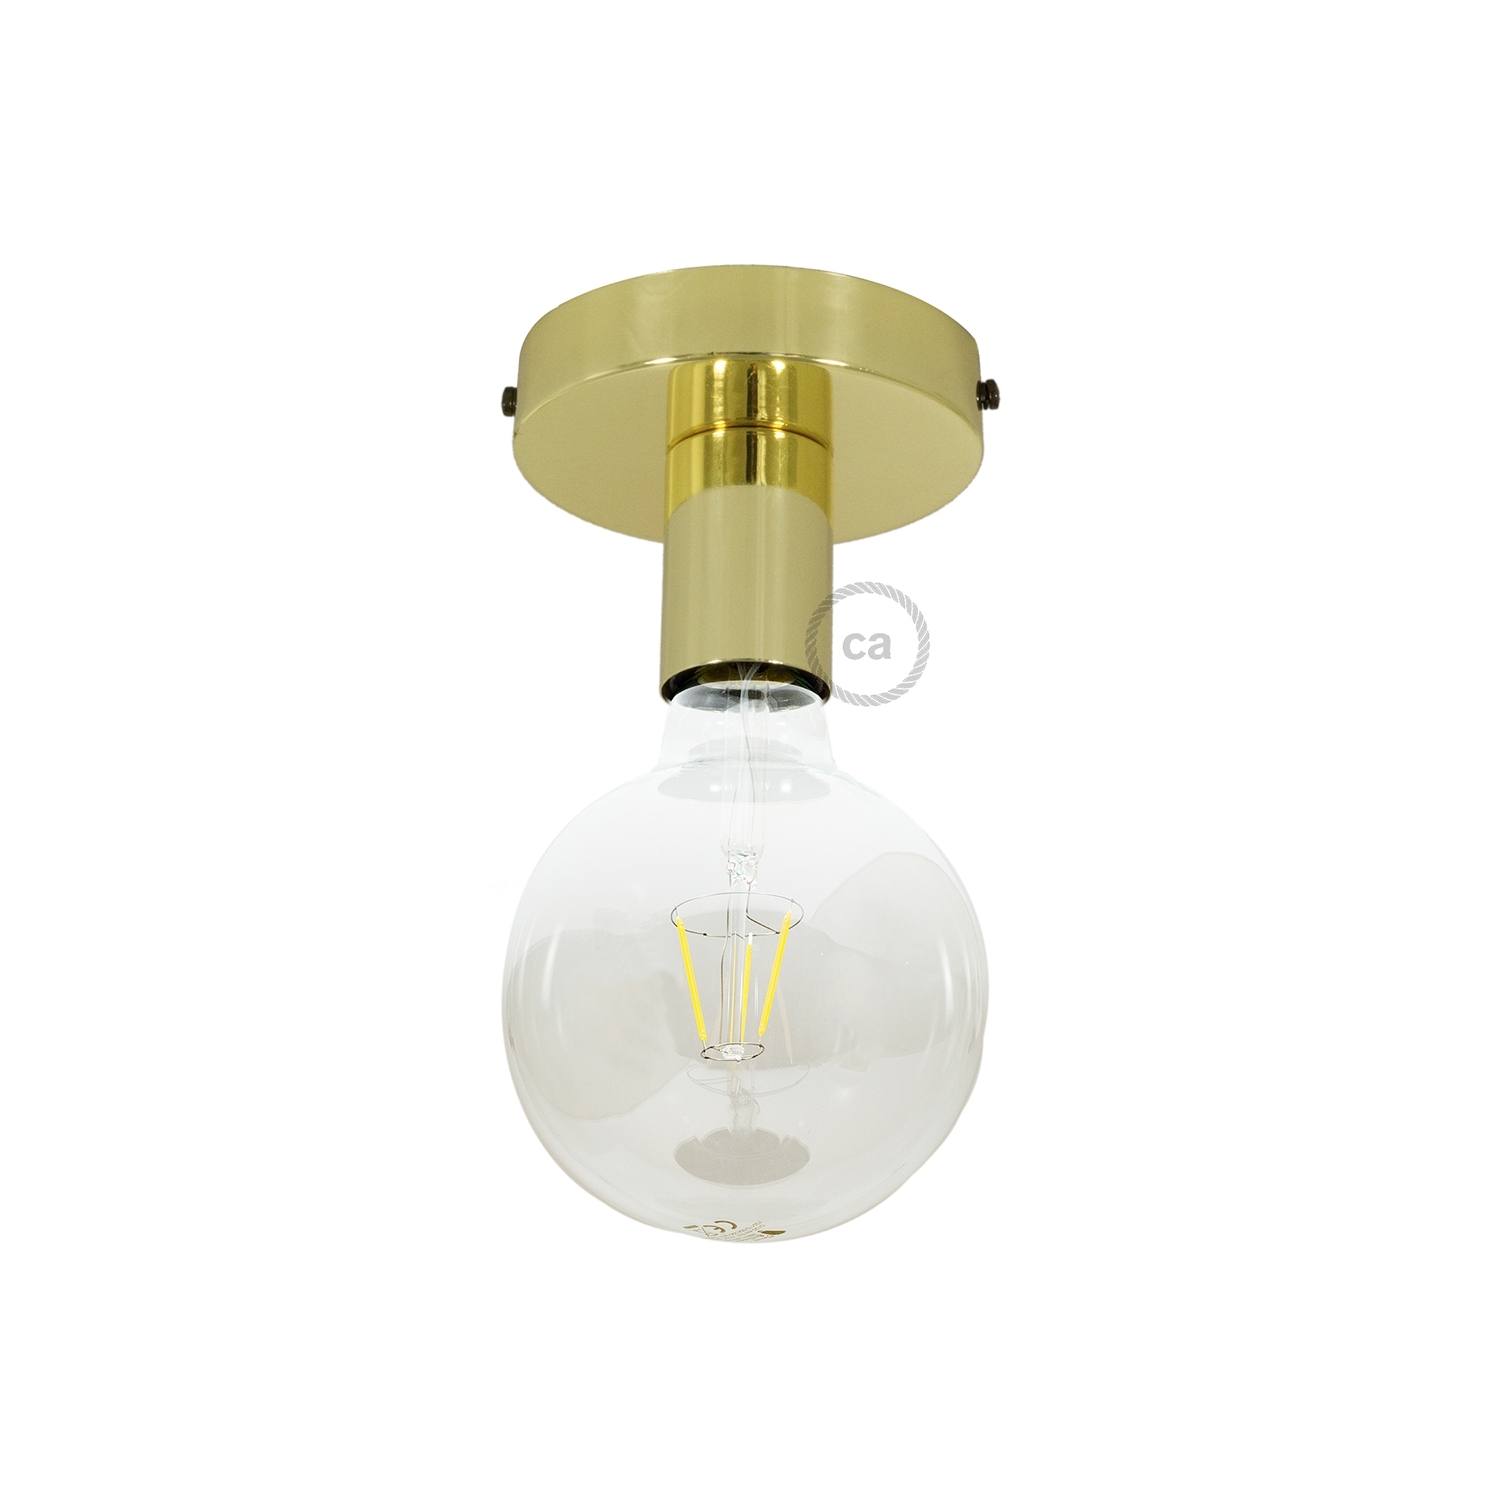 Fermaluce, the brass metal wall or ceiling light source.